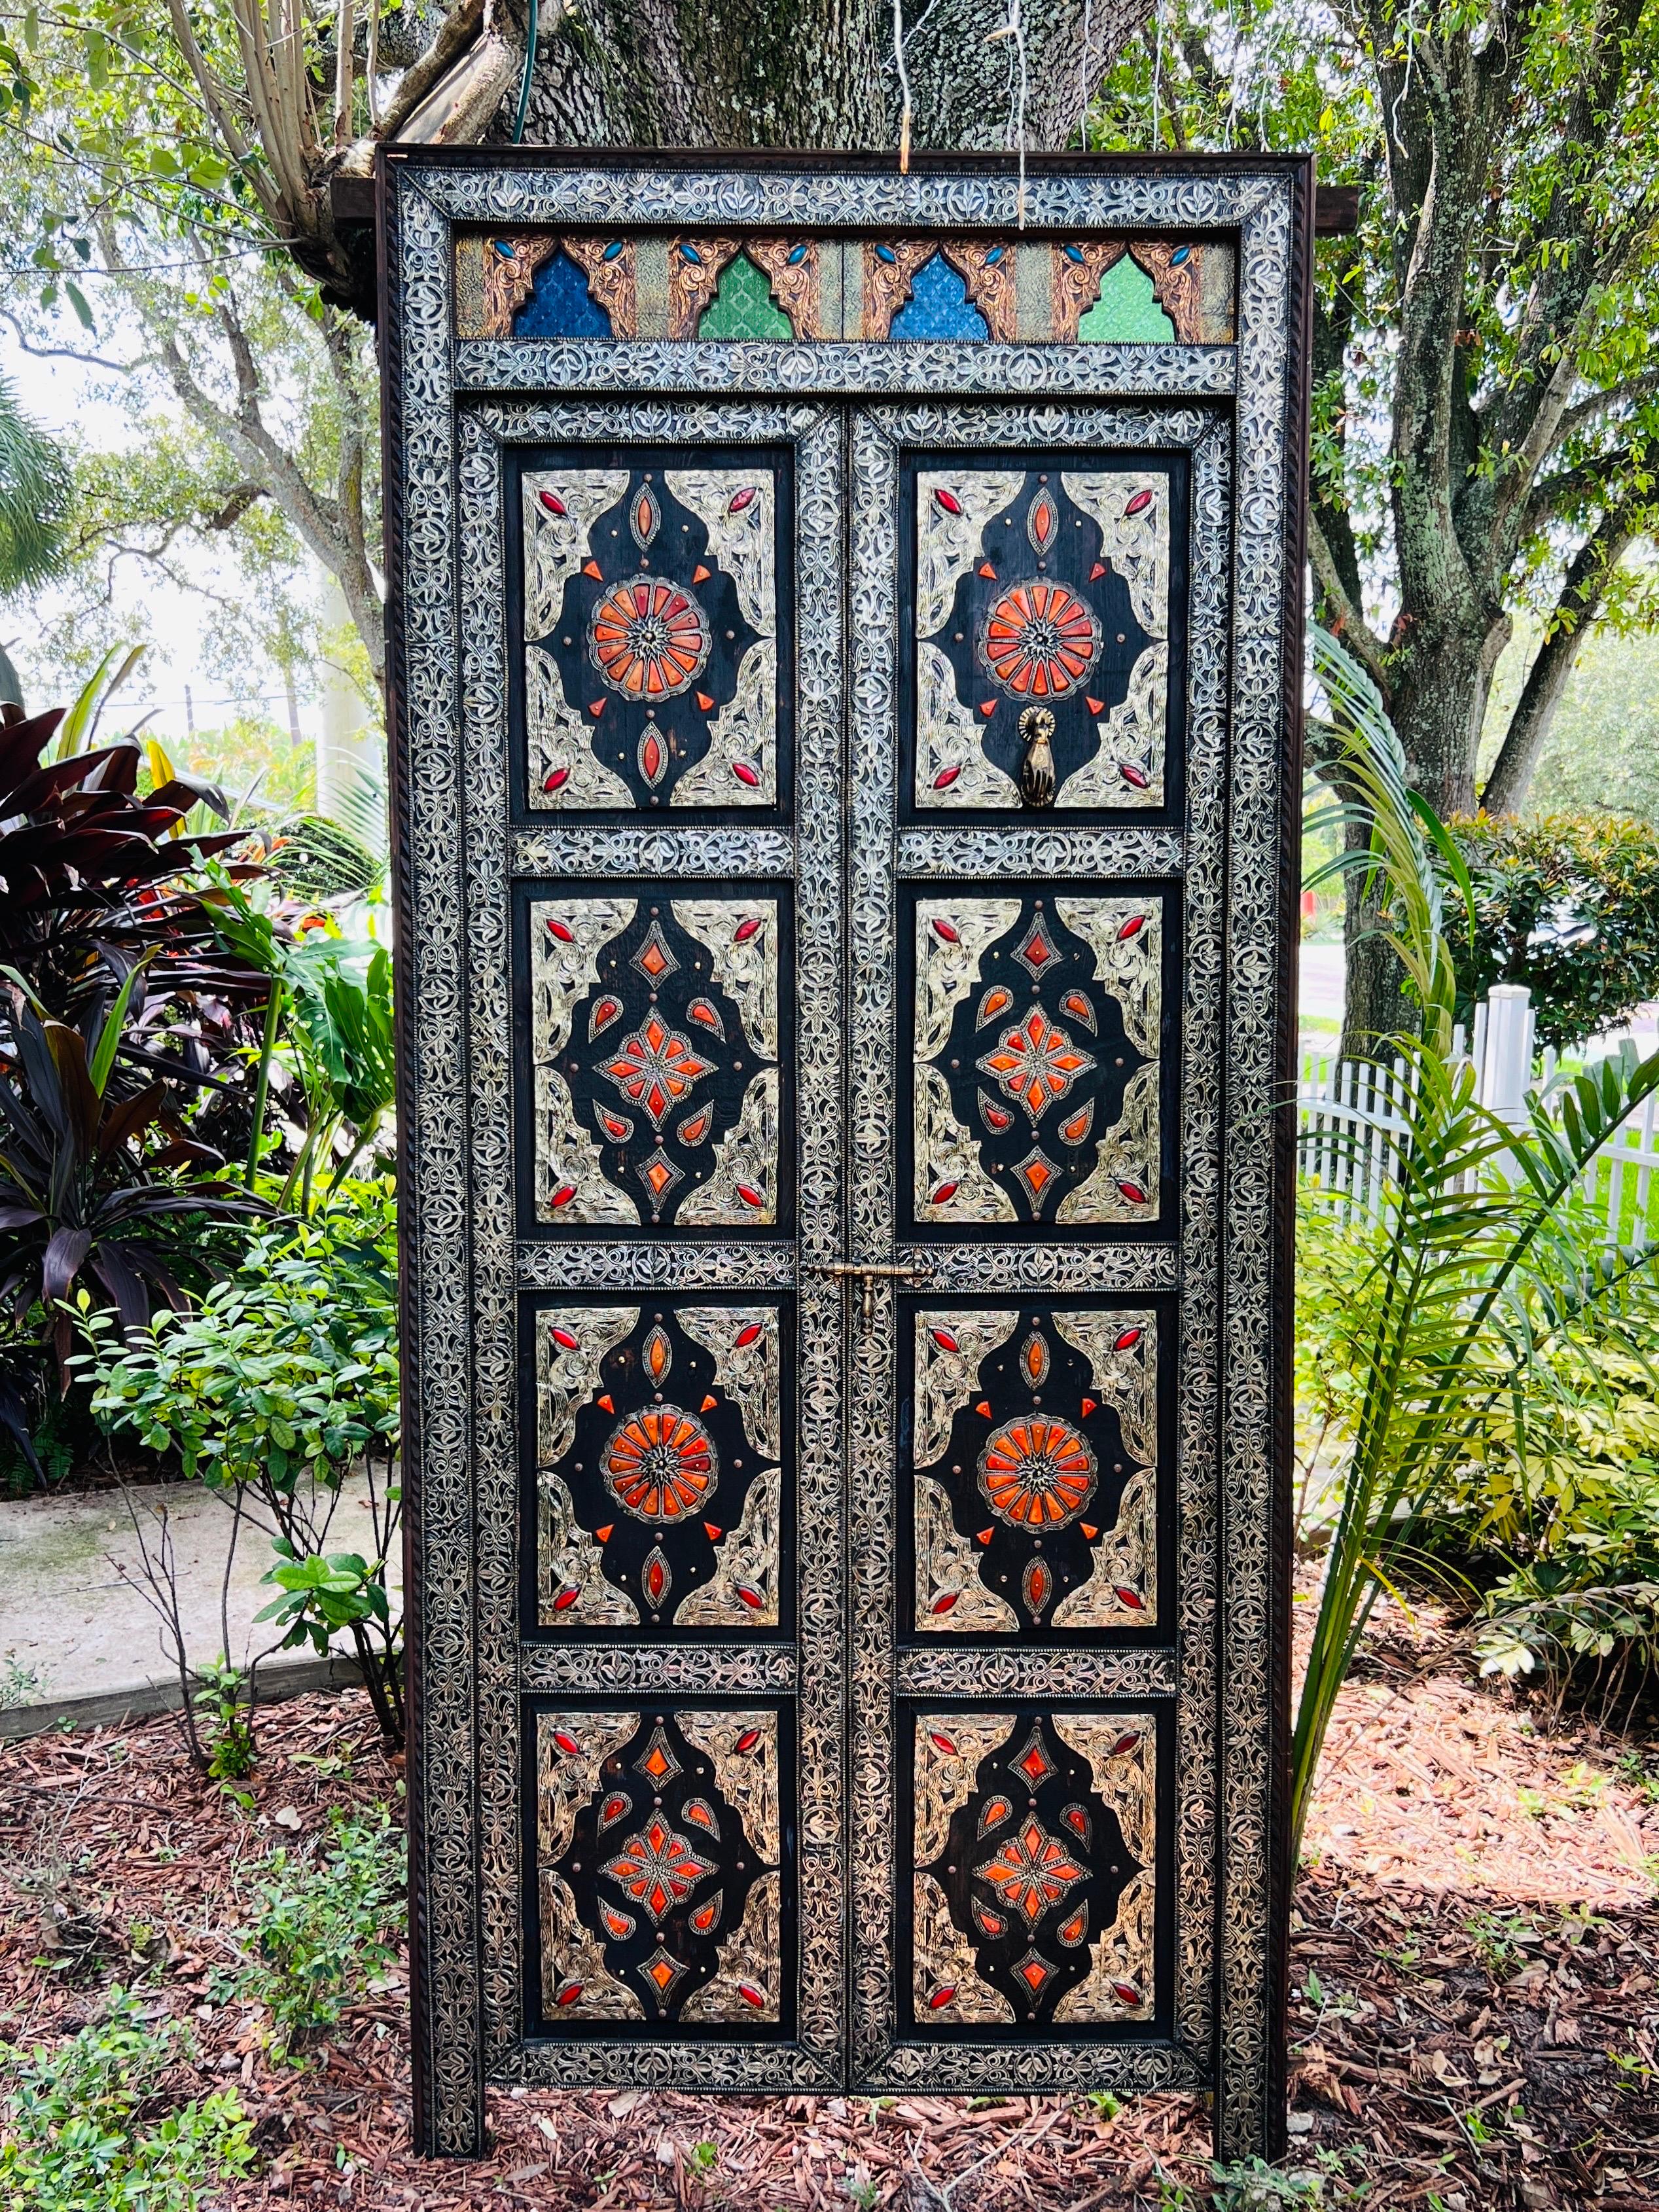 Spectacular Moroccan doorway with paneled double doors. One-of-a-kind palace craftsmanship featuring intricate and ornamented metal work with Moorish motifs on both sides of the doors.  The ebonized wood frame has silver metal overlays with